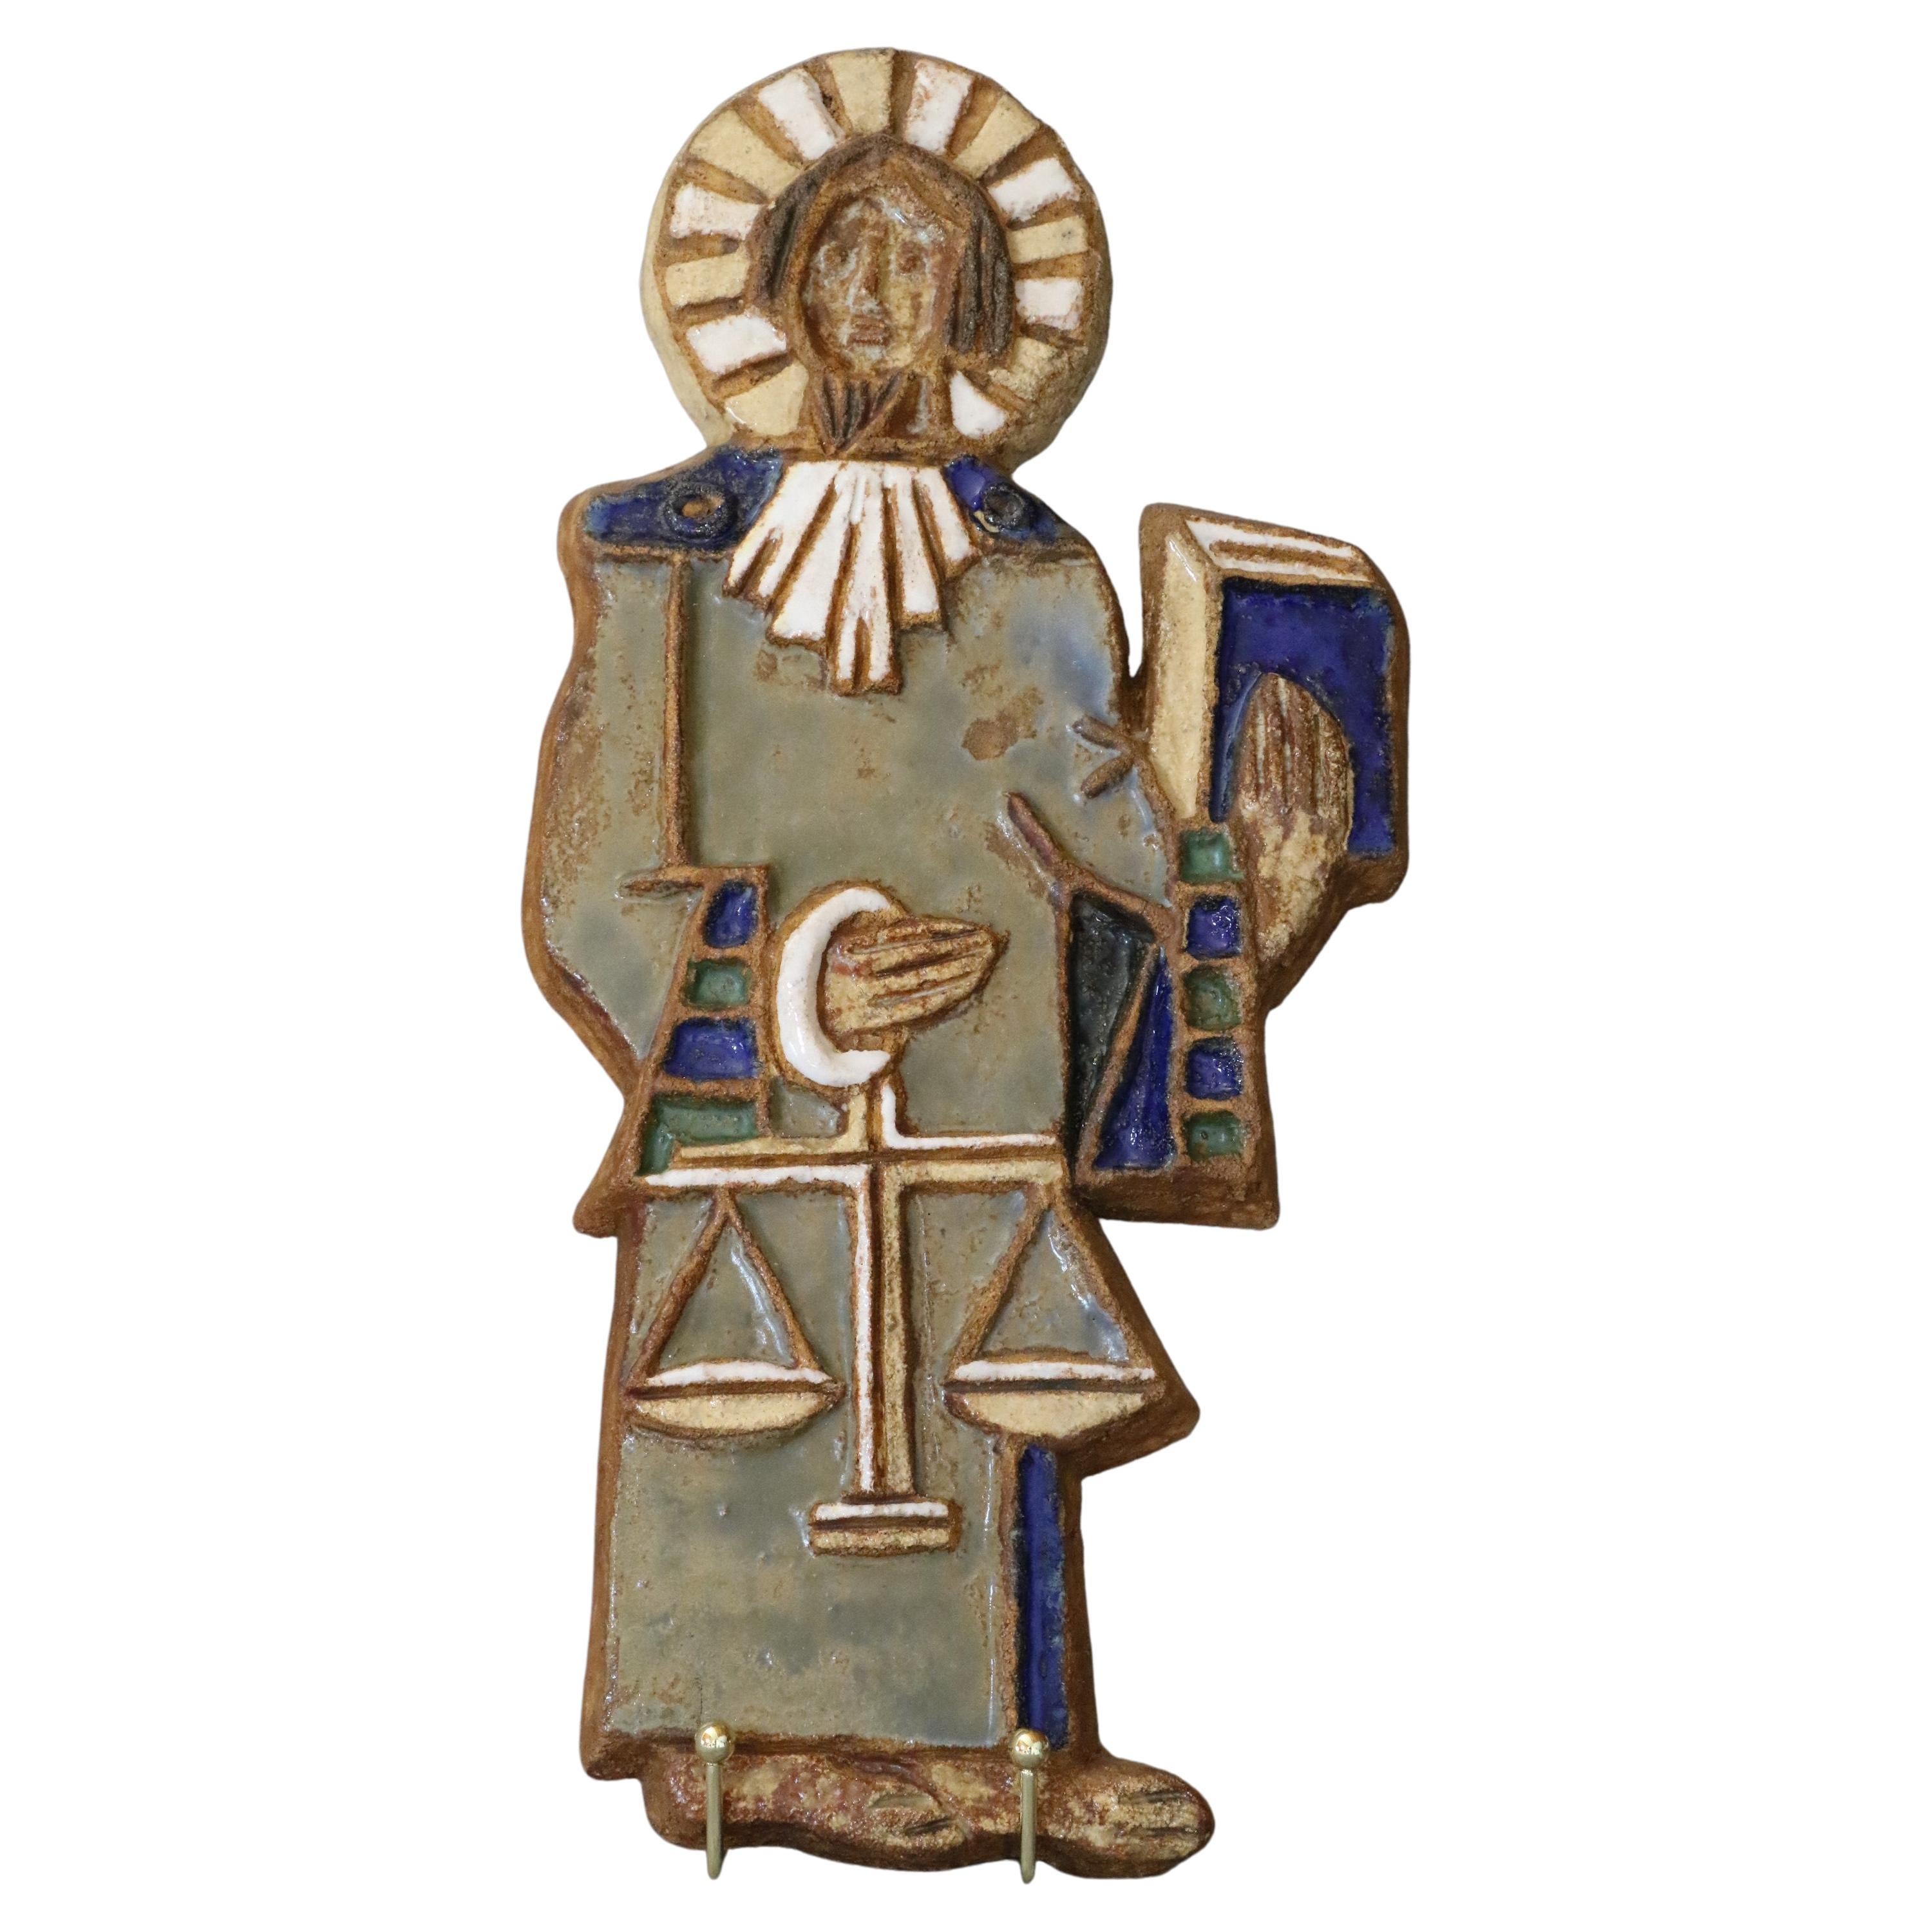 Les Argonautes - Mid-Century Modern French Ceramic, Saint Michael - 1960s, Signed

Glazed ceramic plate representing St Michel. It is a decorative work of very beautiful size. There is a nice contrast between the liveliness of the colors of the